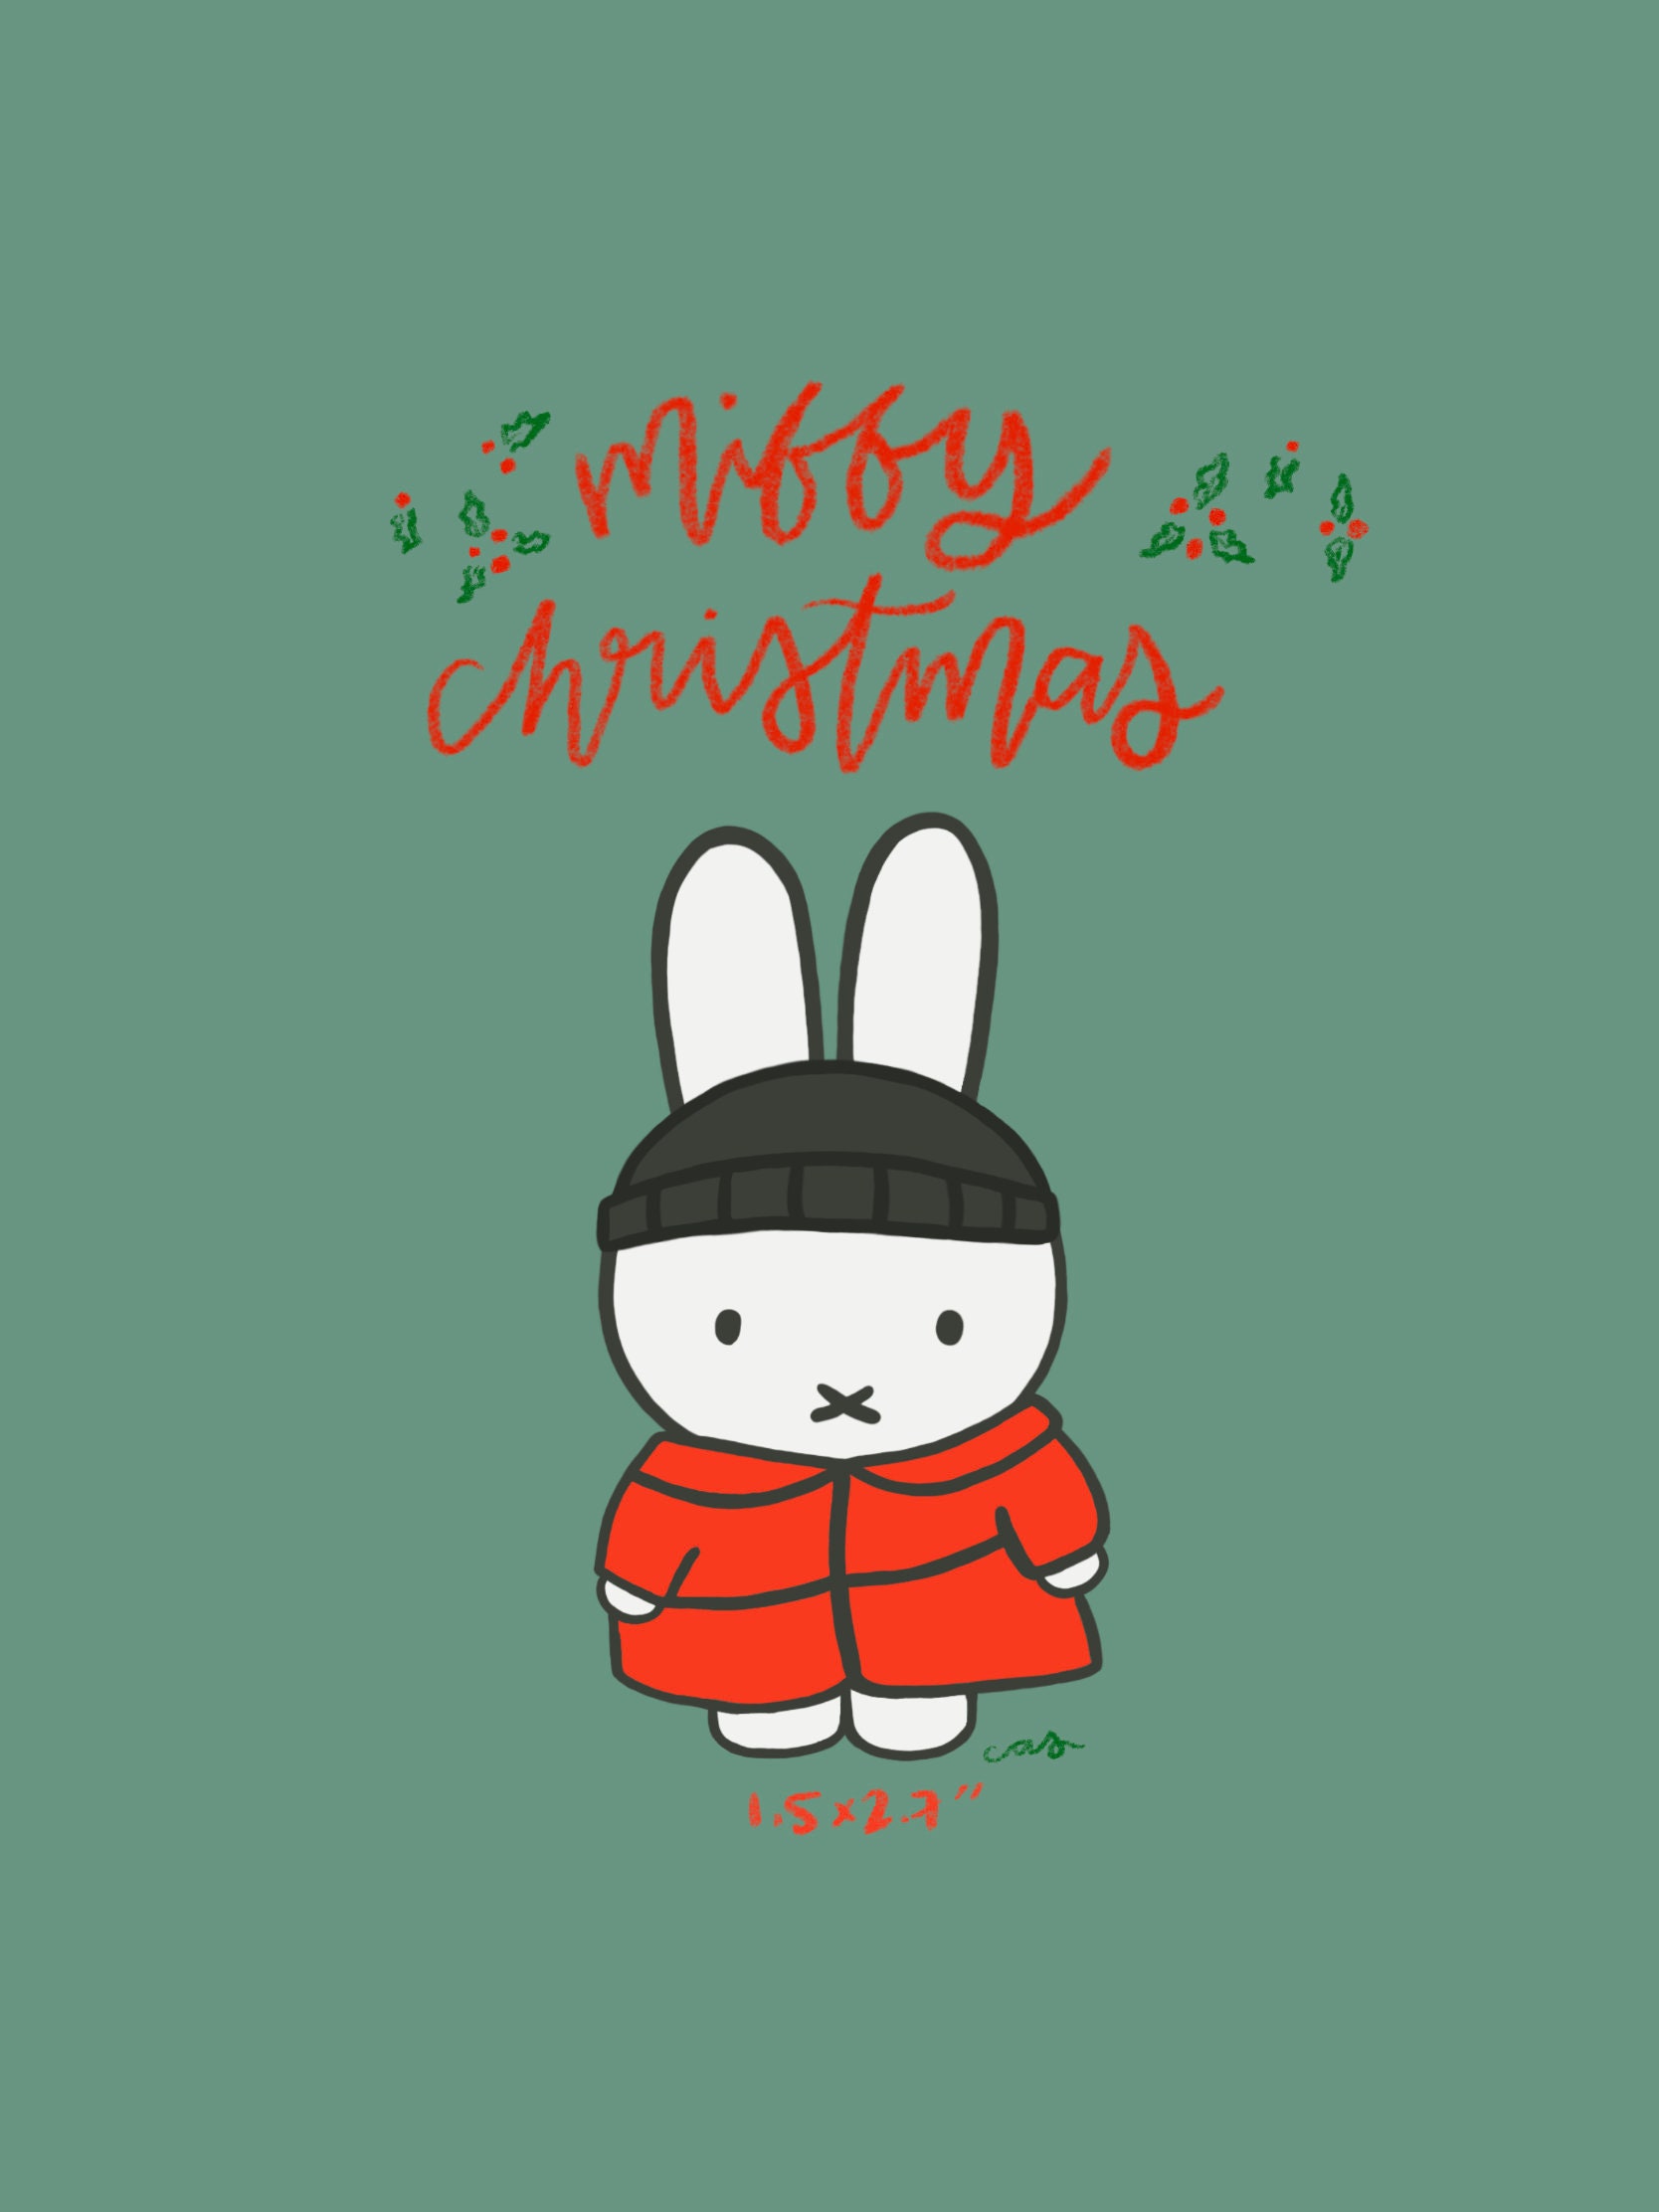 Digital Cute Bunny Miffy and Friends Clip Art/sticker/goodnotes